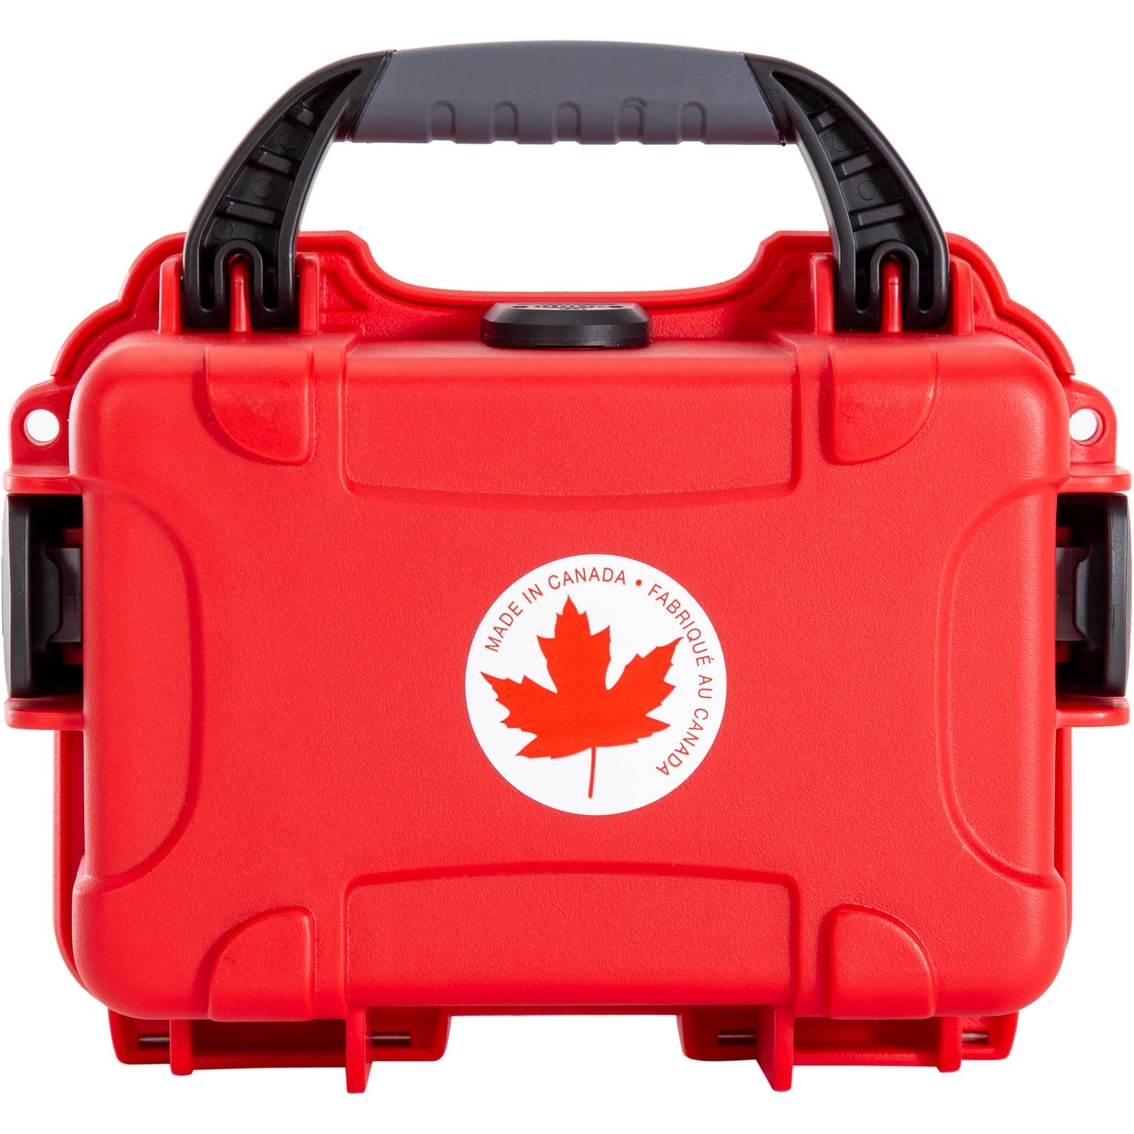 Nanuk Case 903 with First Aid Logo - Image 2 of 4